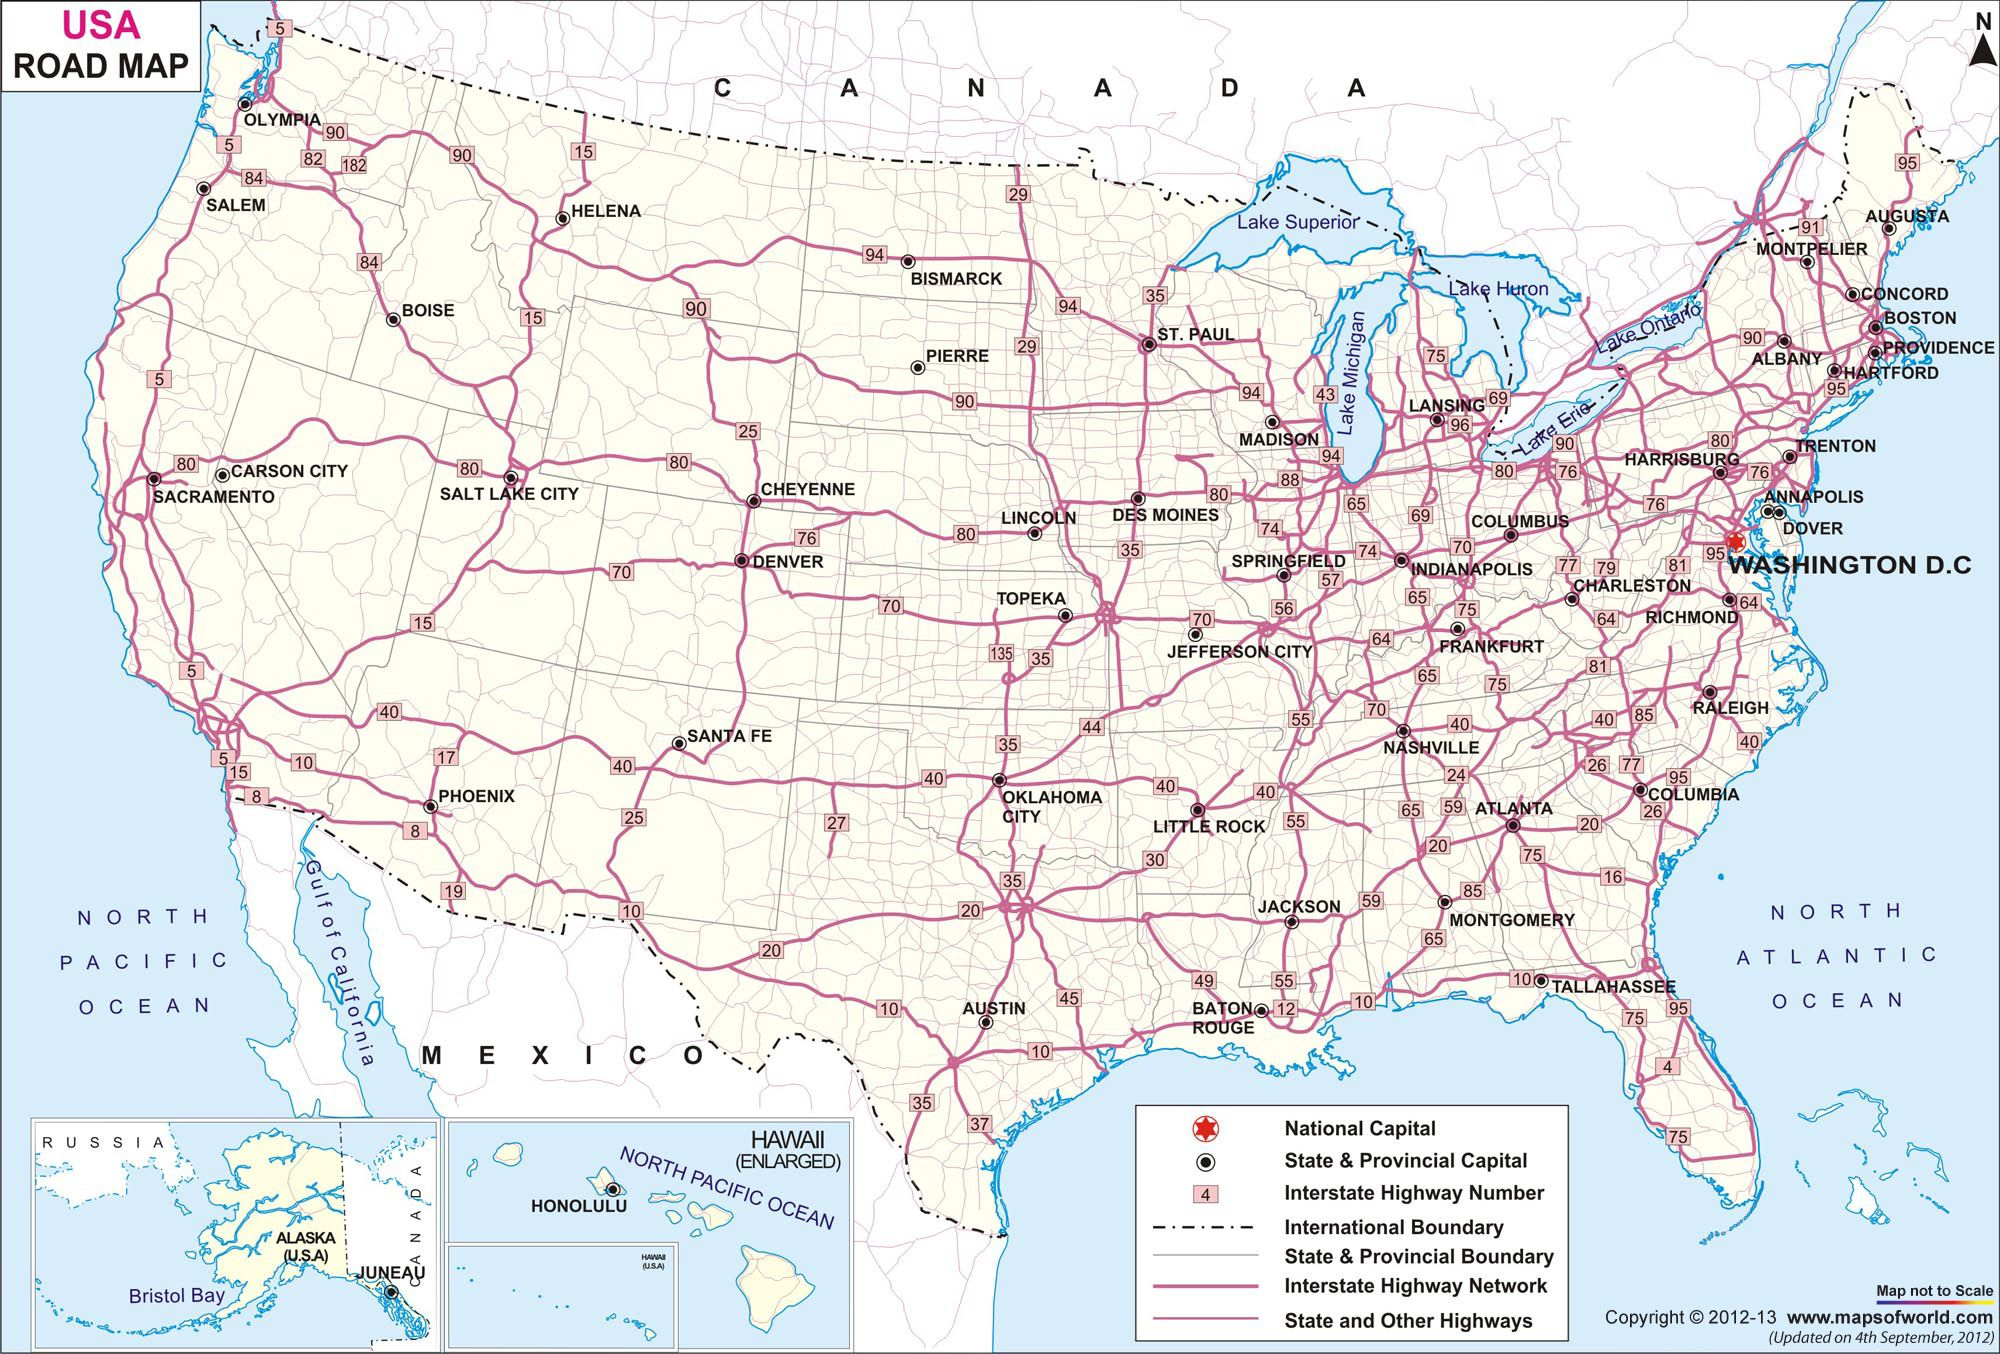 Enlarge USA Road Map Usa Road Map Highway Map Driving Maps